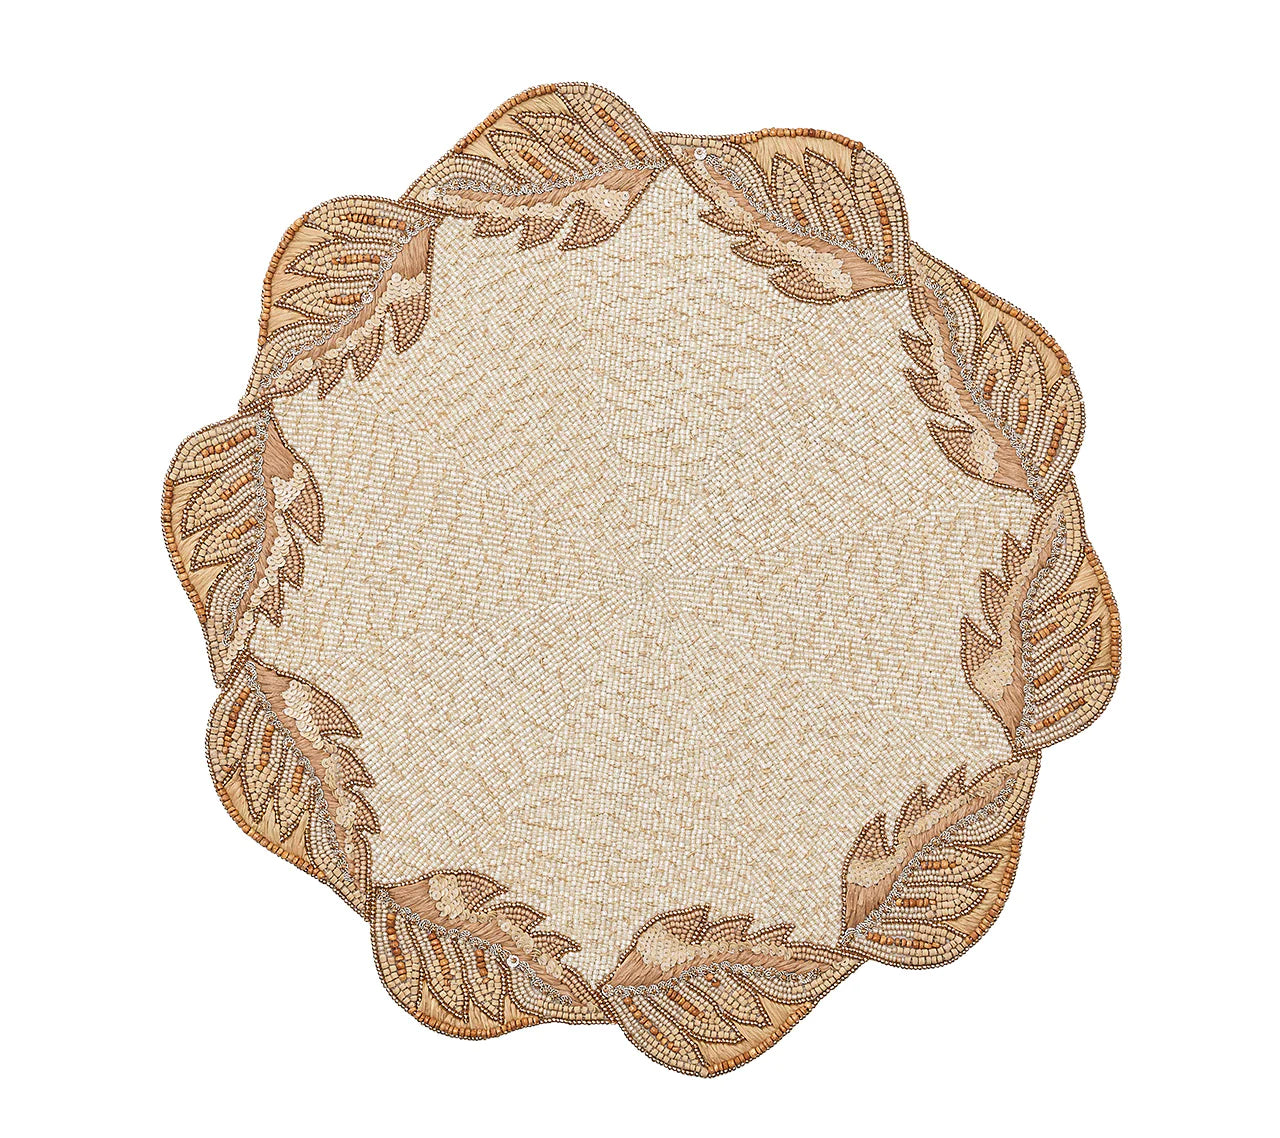 Winding Vines Placemat in Ivory, Natural & Gold, Set of 2